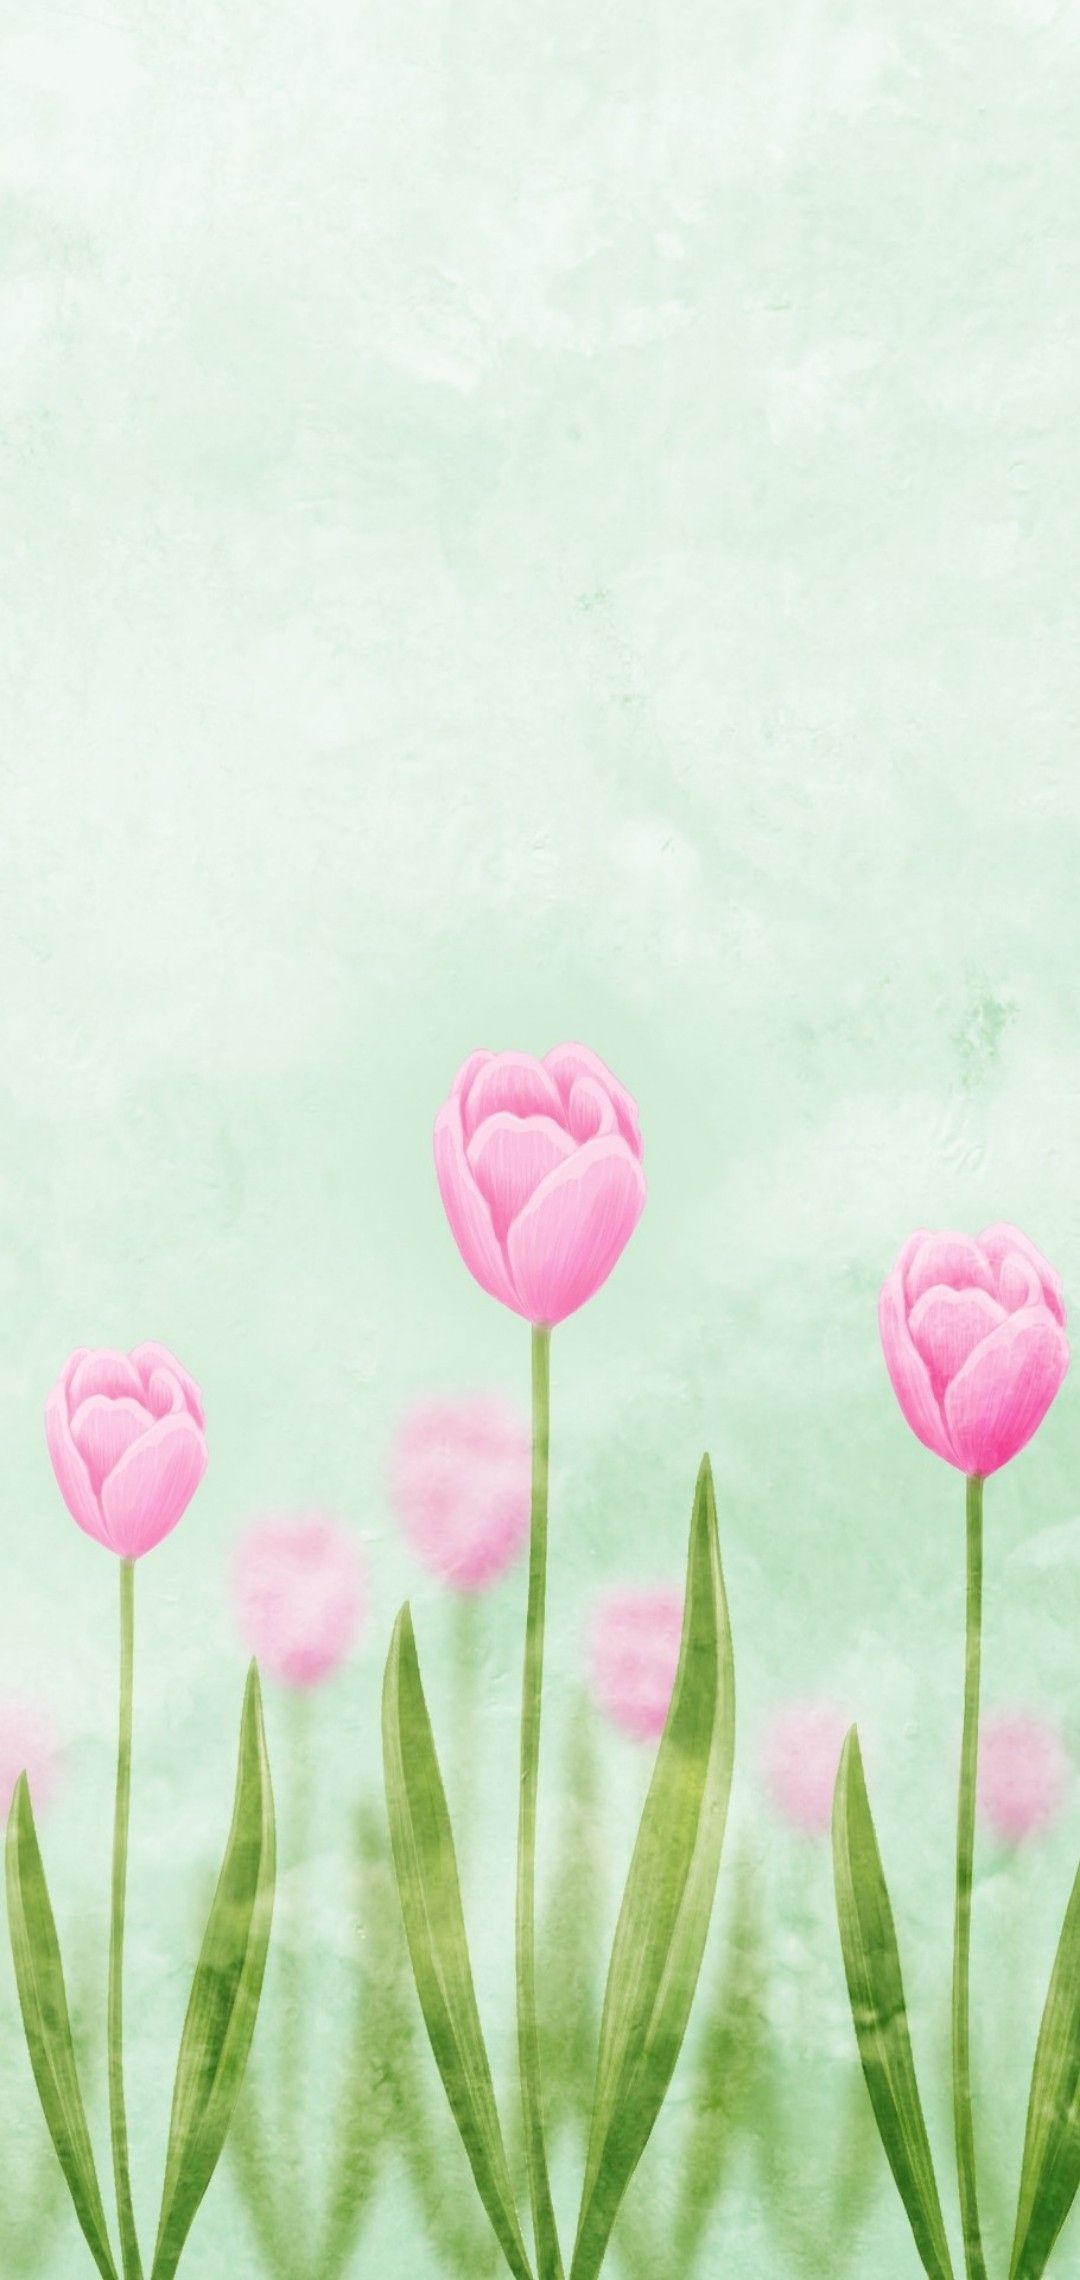 IPhone wallpaper with flowers. - Tulip